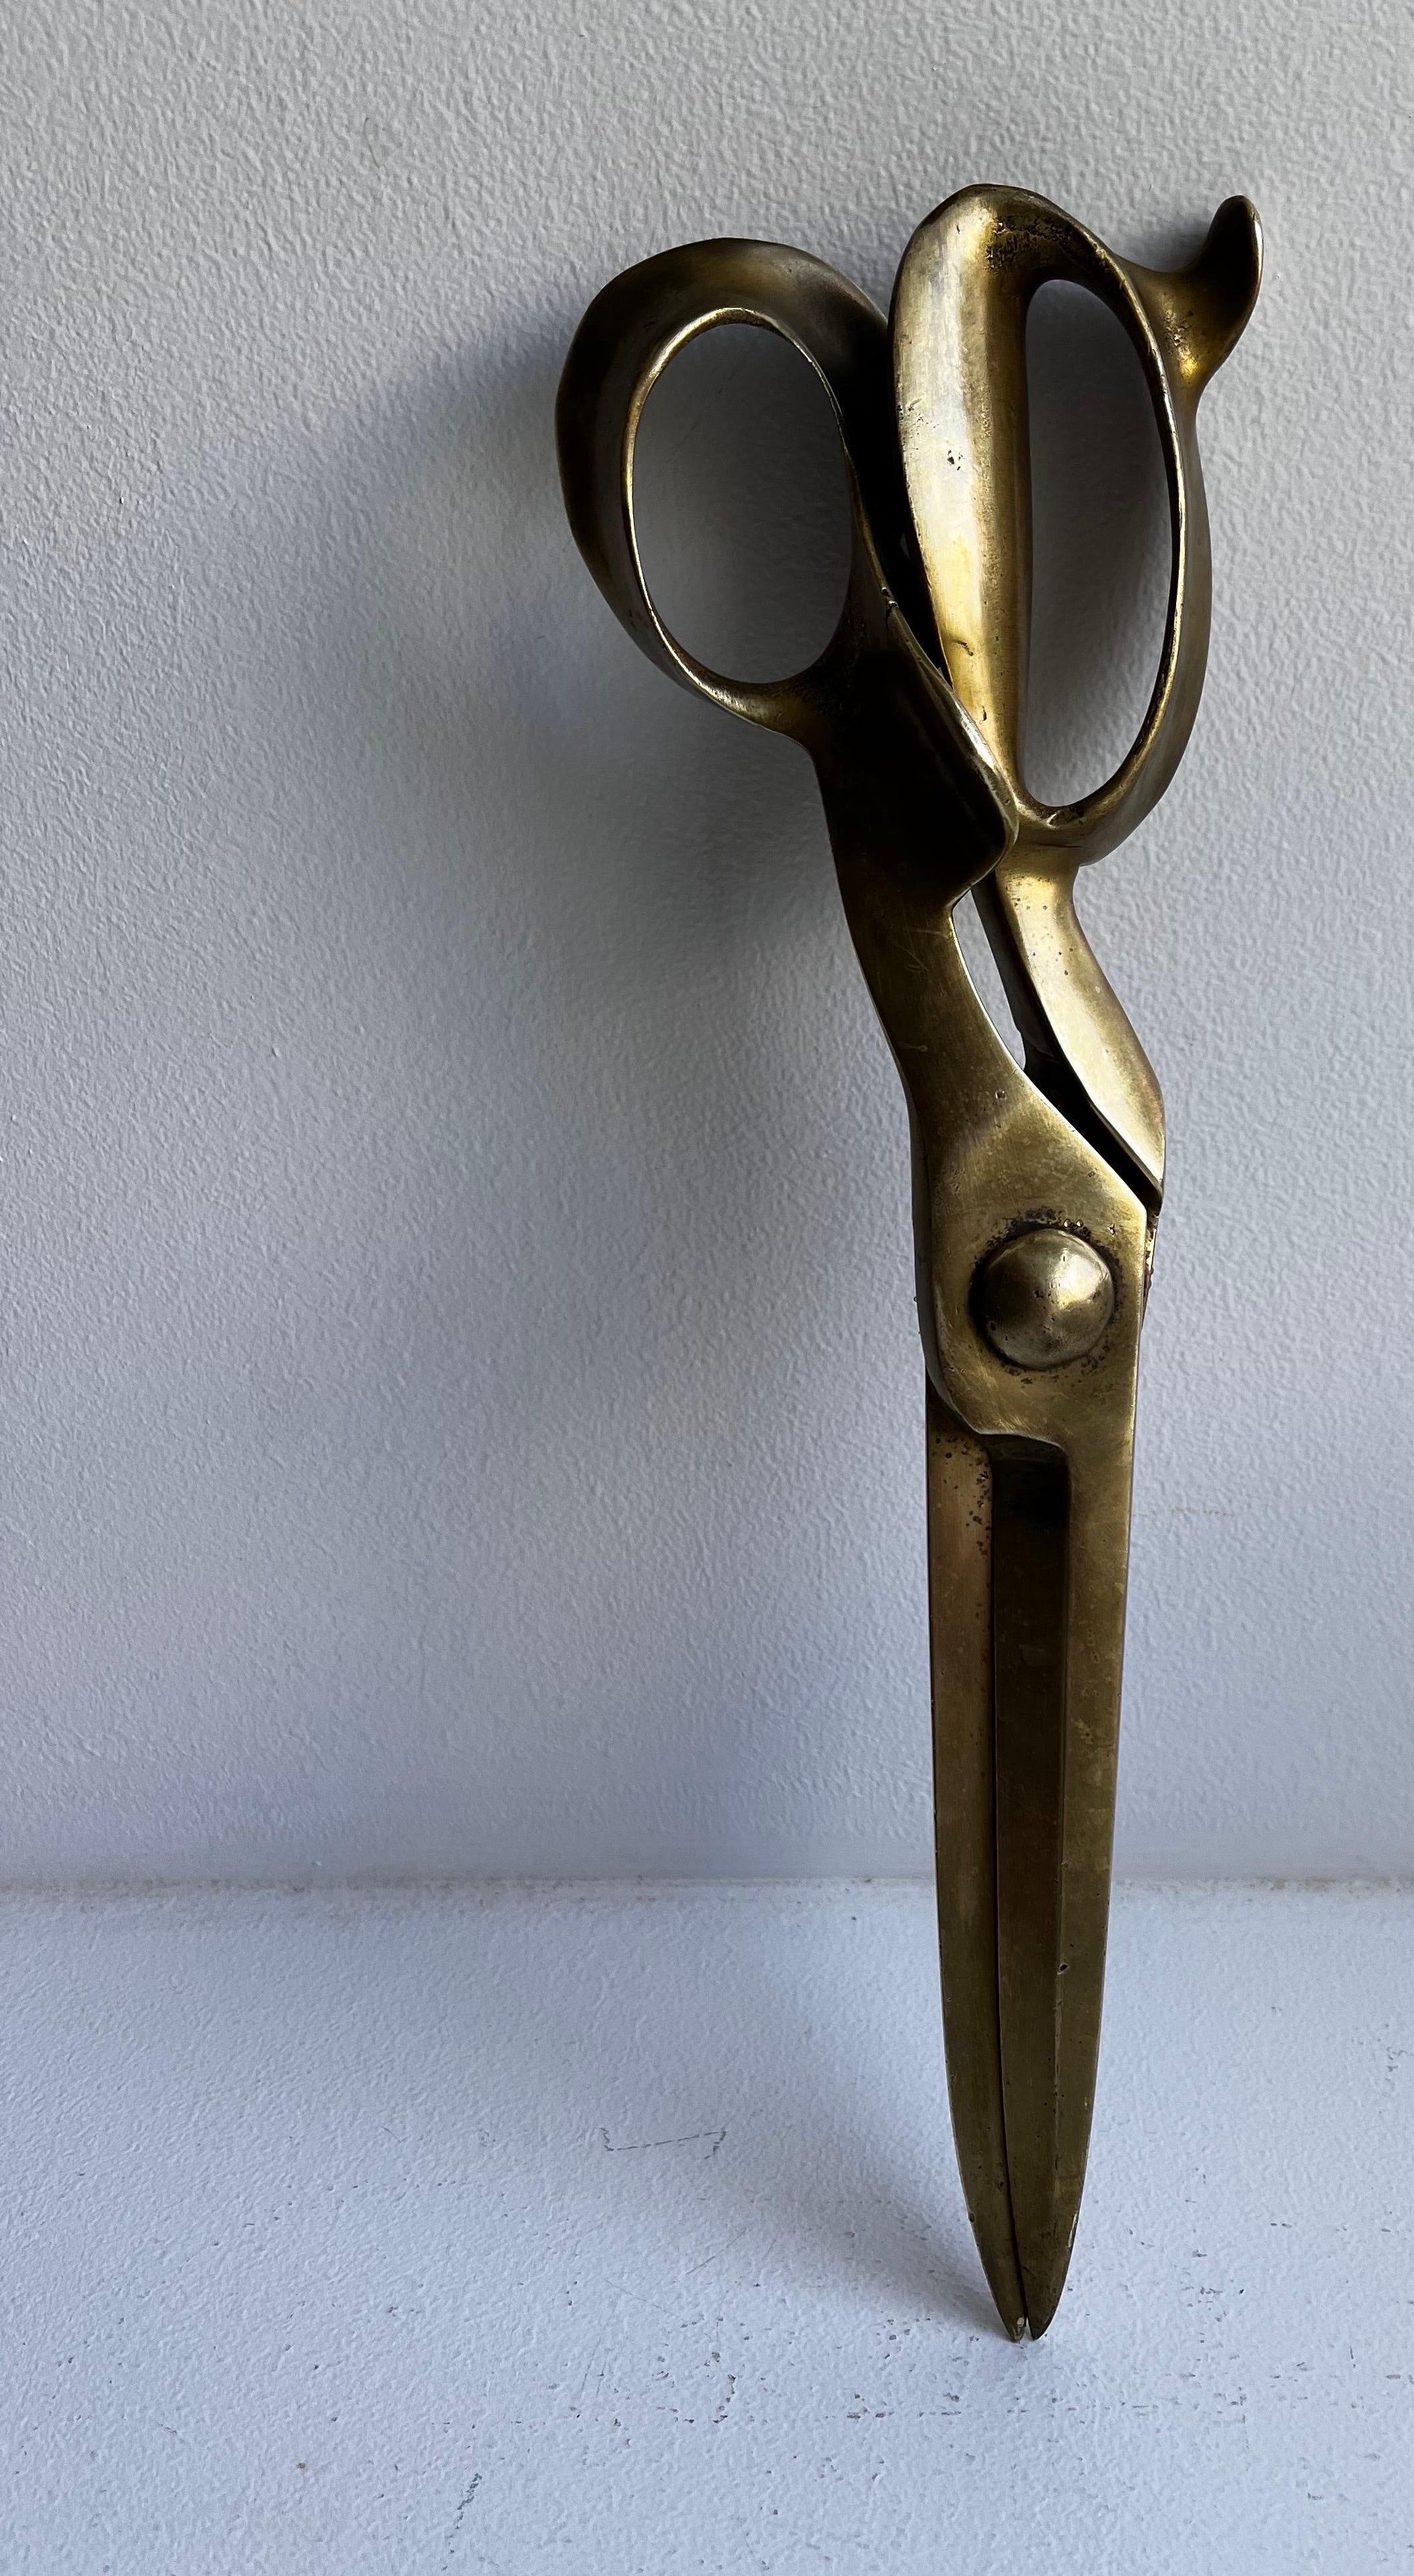 Brass oversized scissors 
probably used for advertising and or store display.
These will add interest to any room, wall, hair salon or fashion fashion boutique.